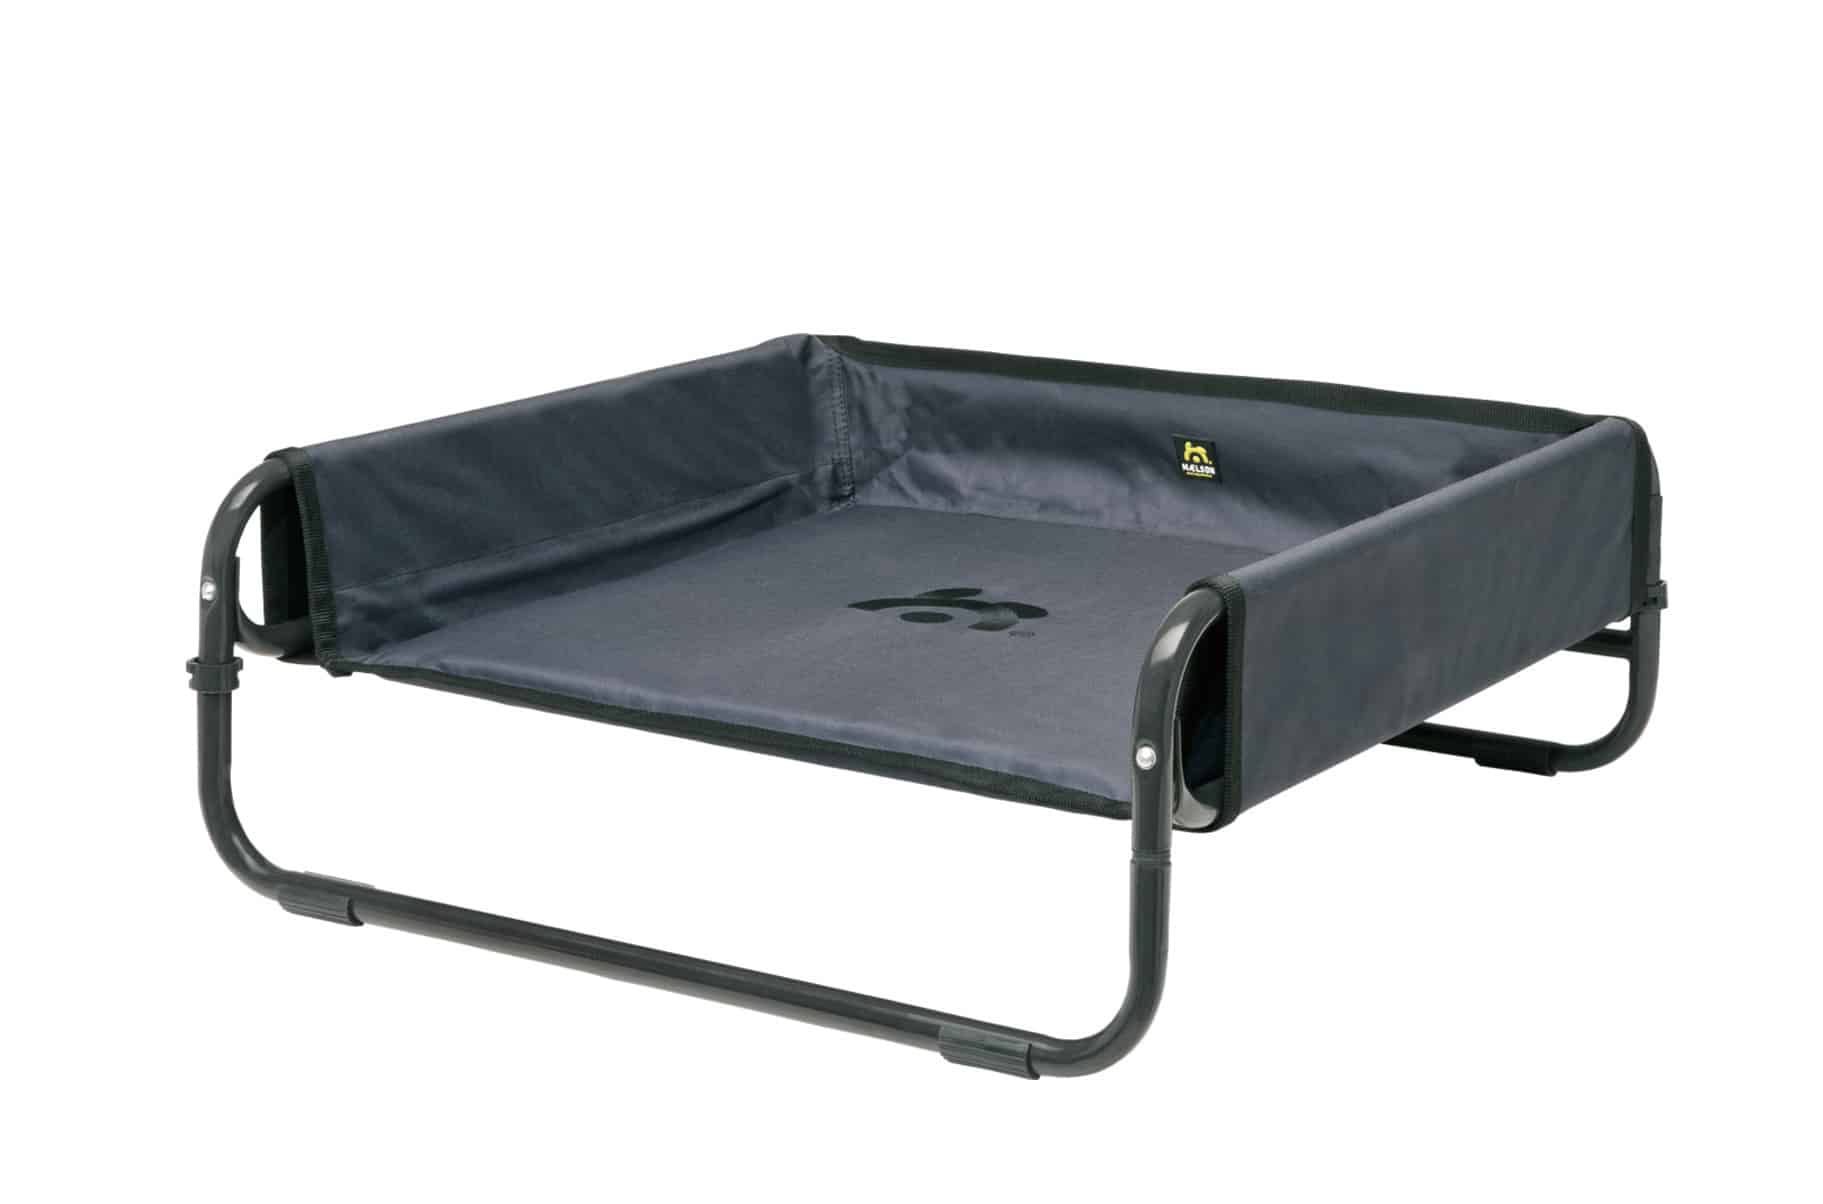 Maelson Soft Bed